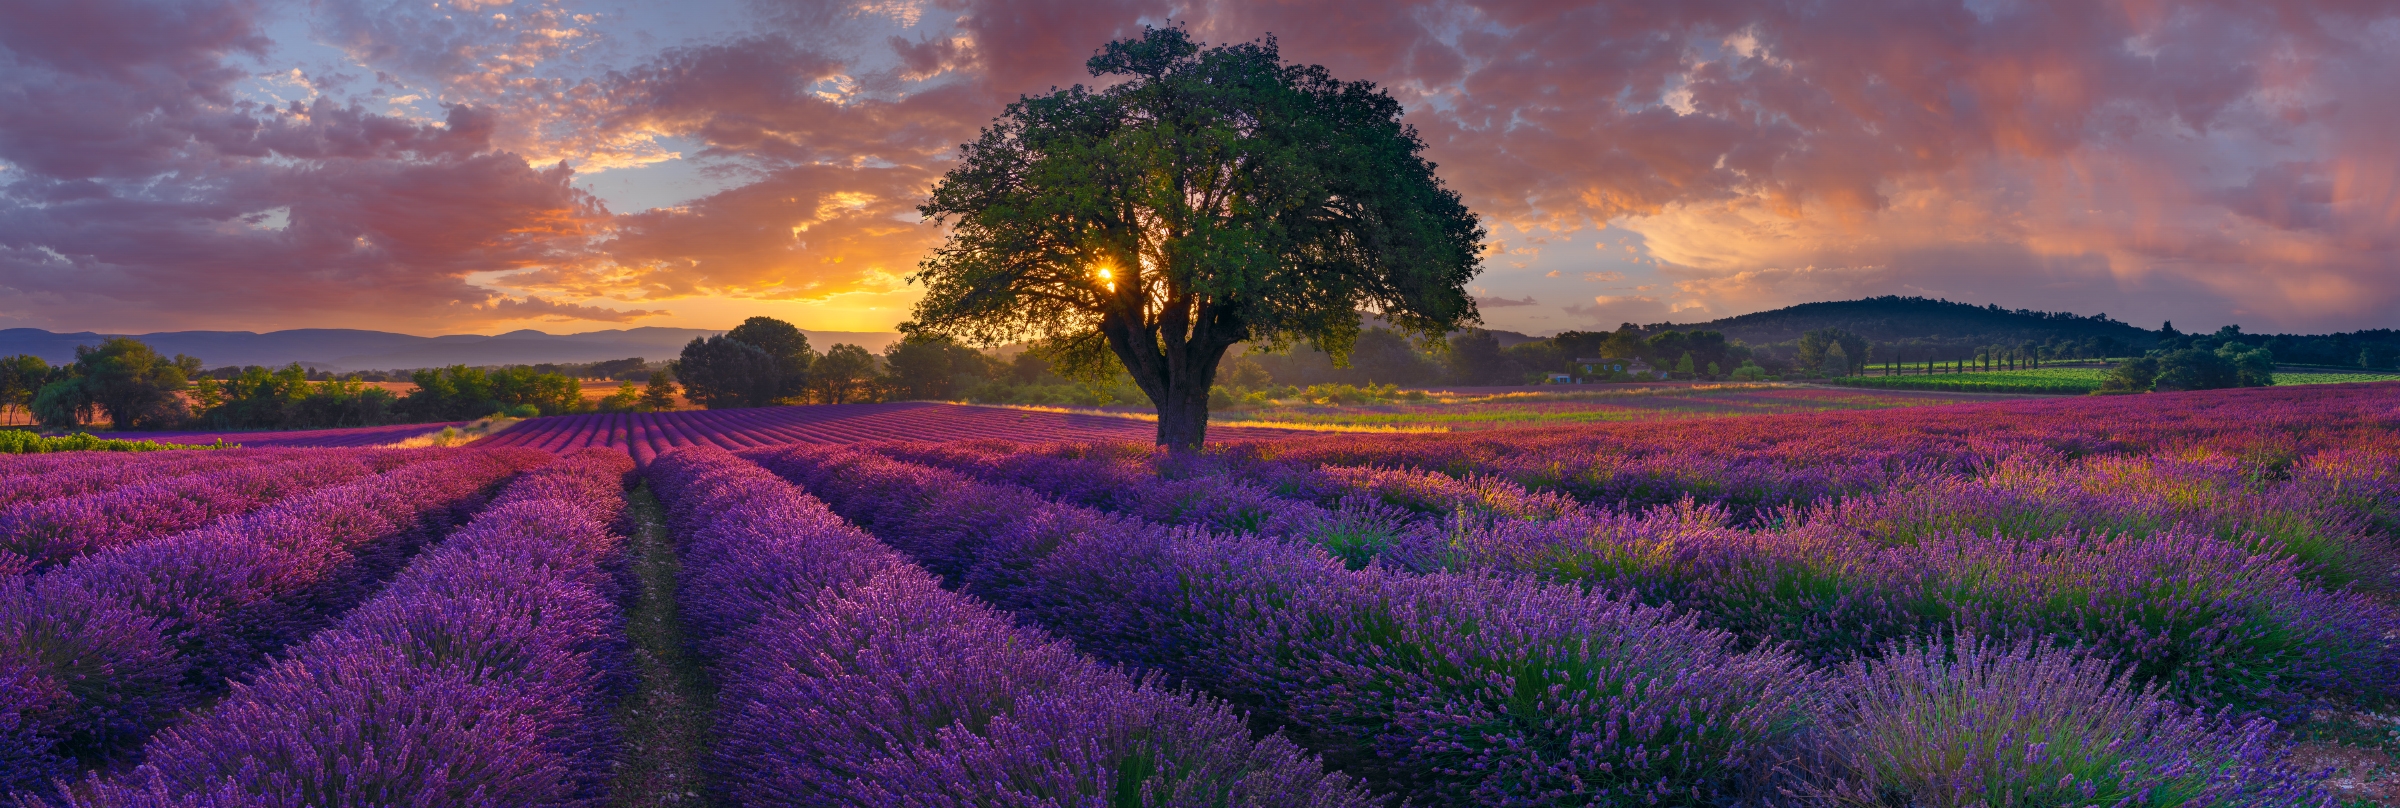 A Morning In France by Peter Lik